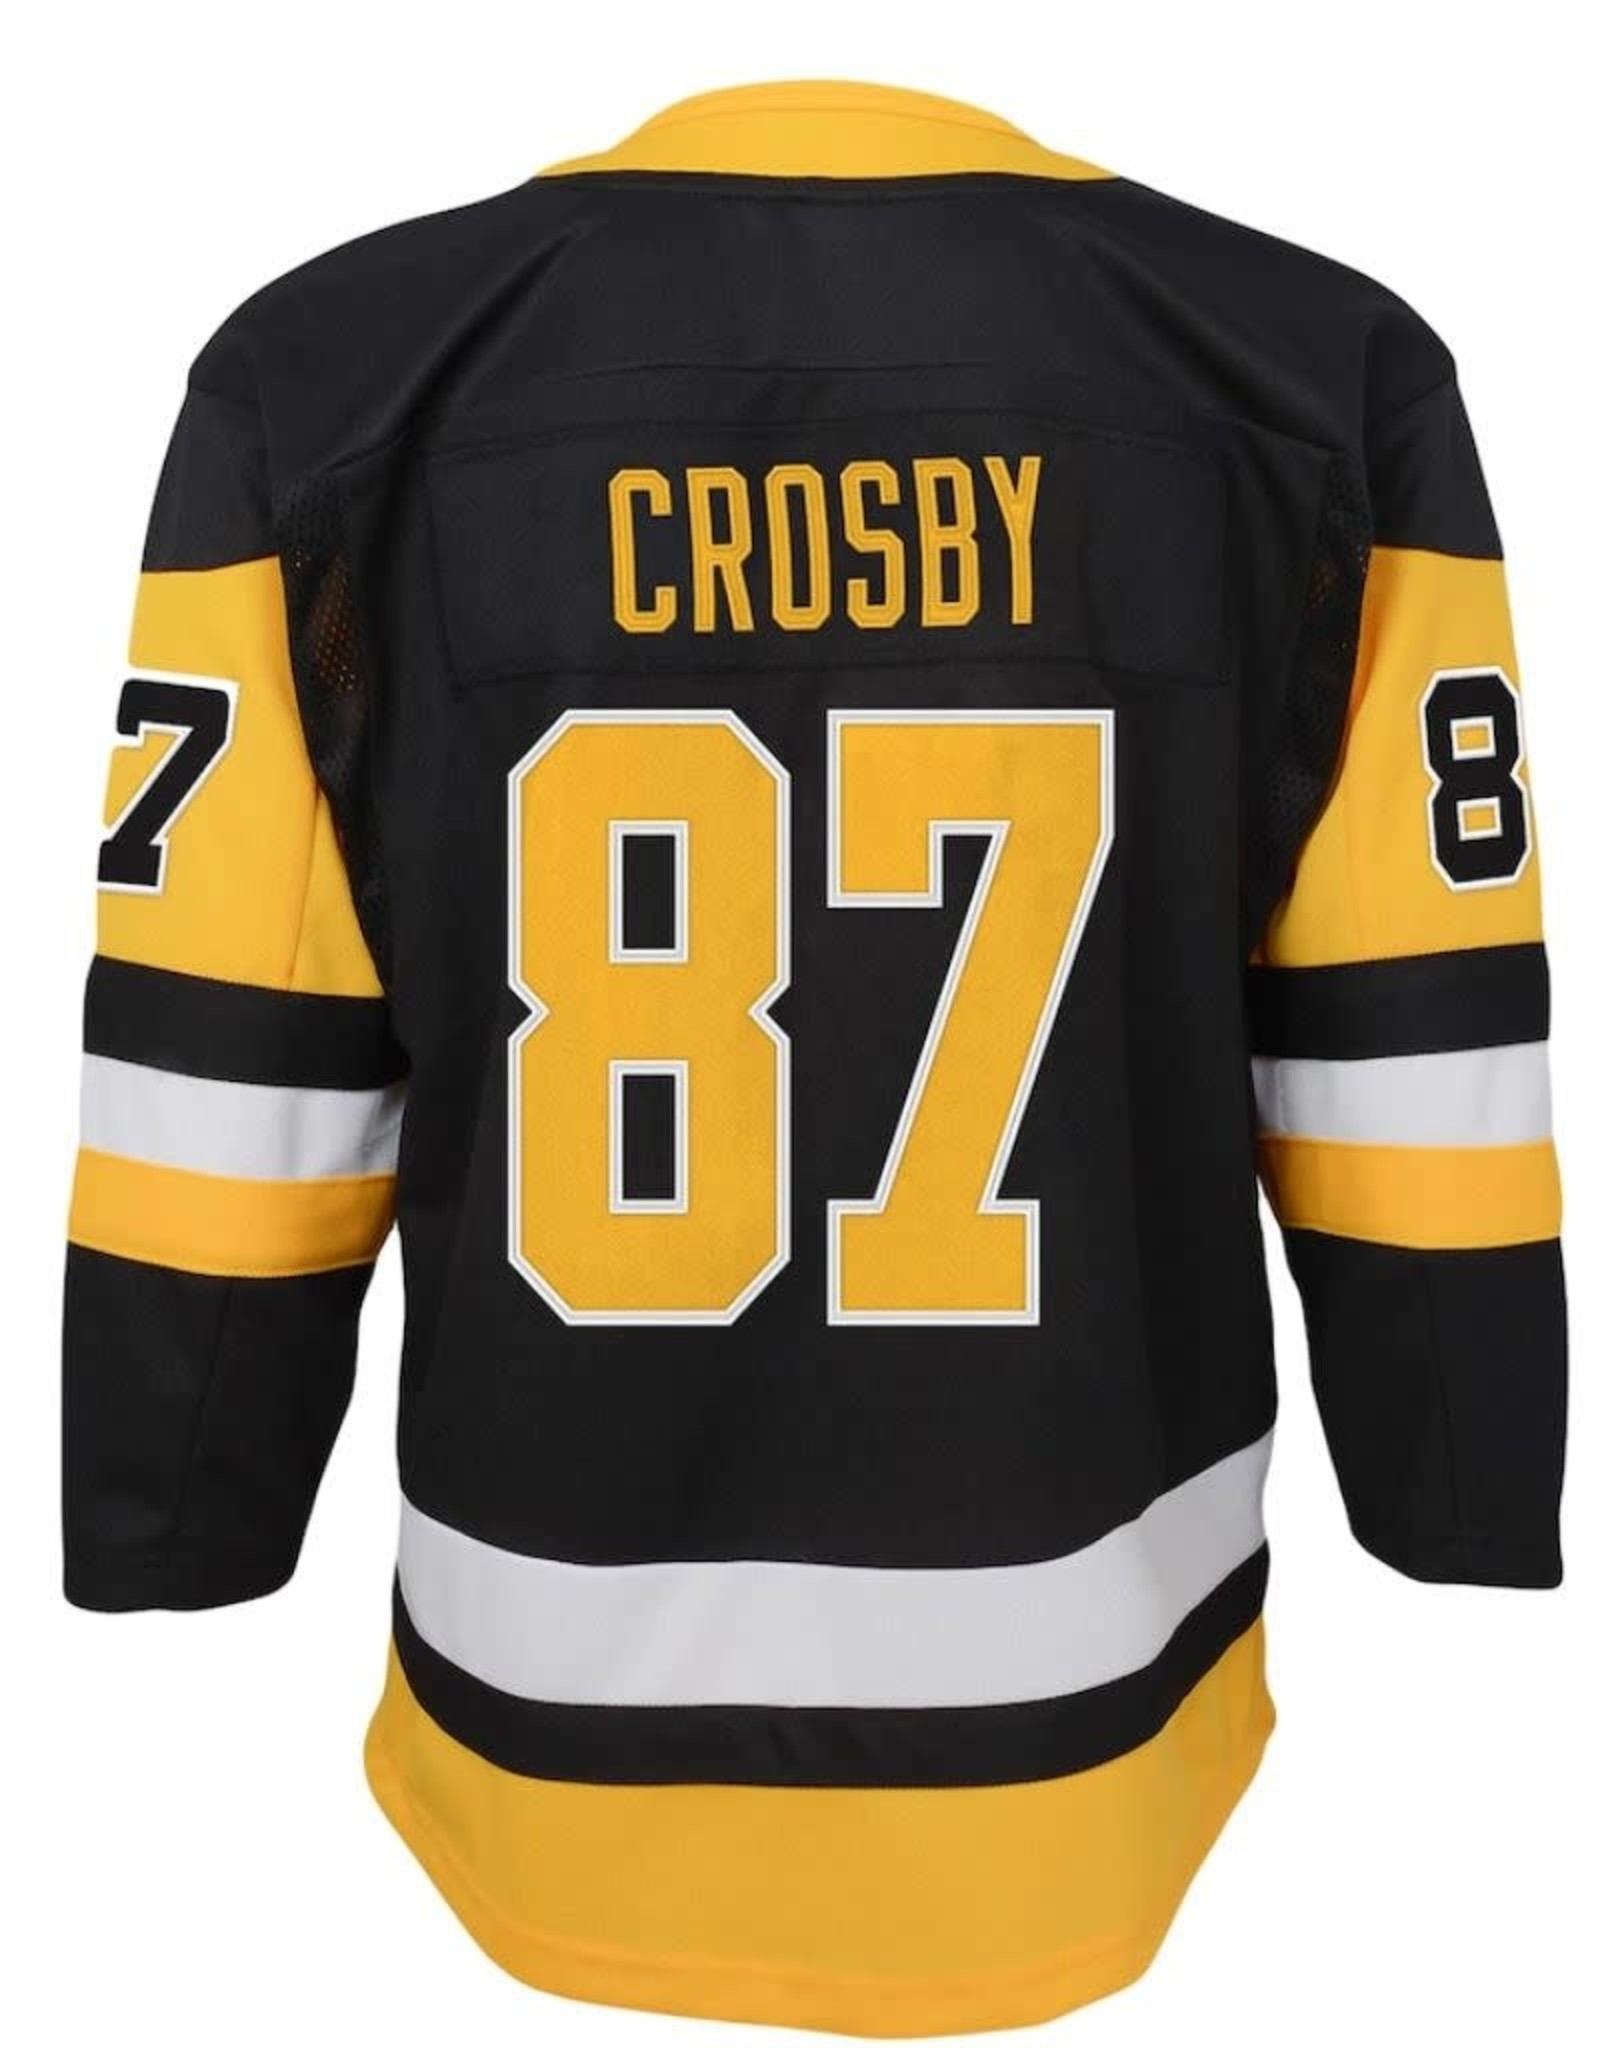 pittsburgh penguins home jersey